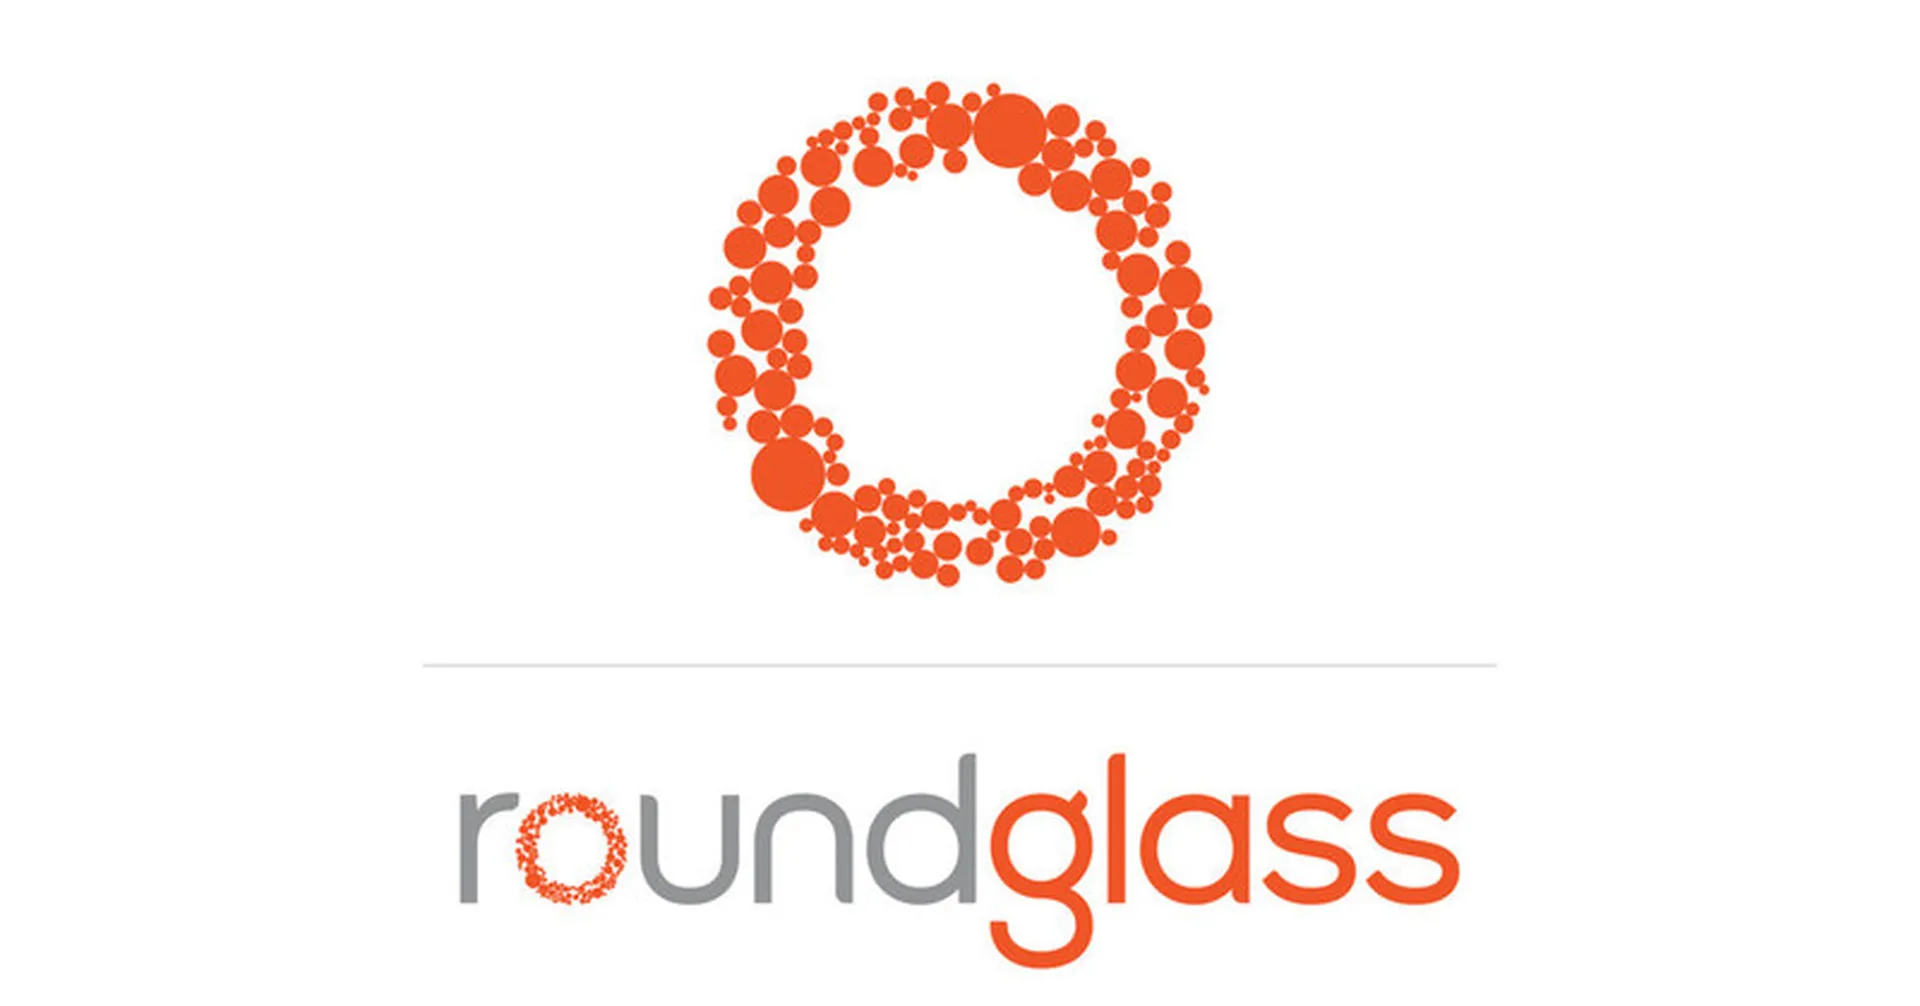 RoundGlass is a global, Wholistic Wellbeing company dedicated to empowering and enabling people on their personal wellbeing journey. RoundGlass’ mission is simple yet ambitious: inspire the power of Wholistic Wellbeing to create a happier, healthier, and more joyful world. The company achieves this by investing in and developing new technology, sha...